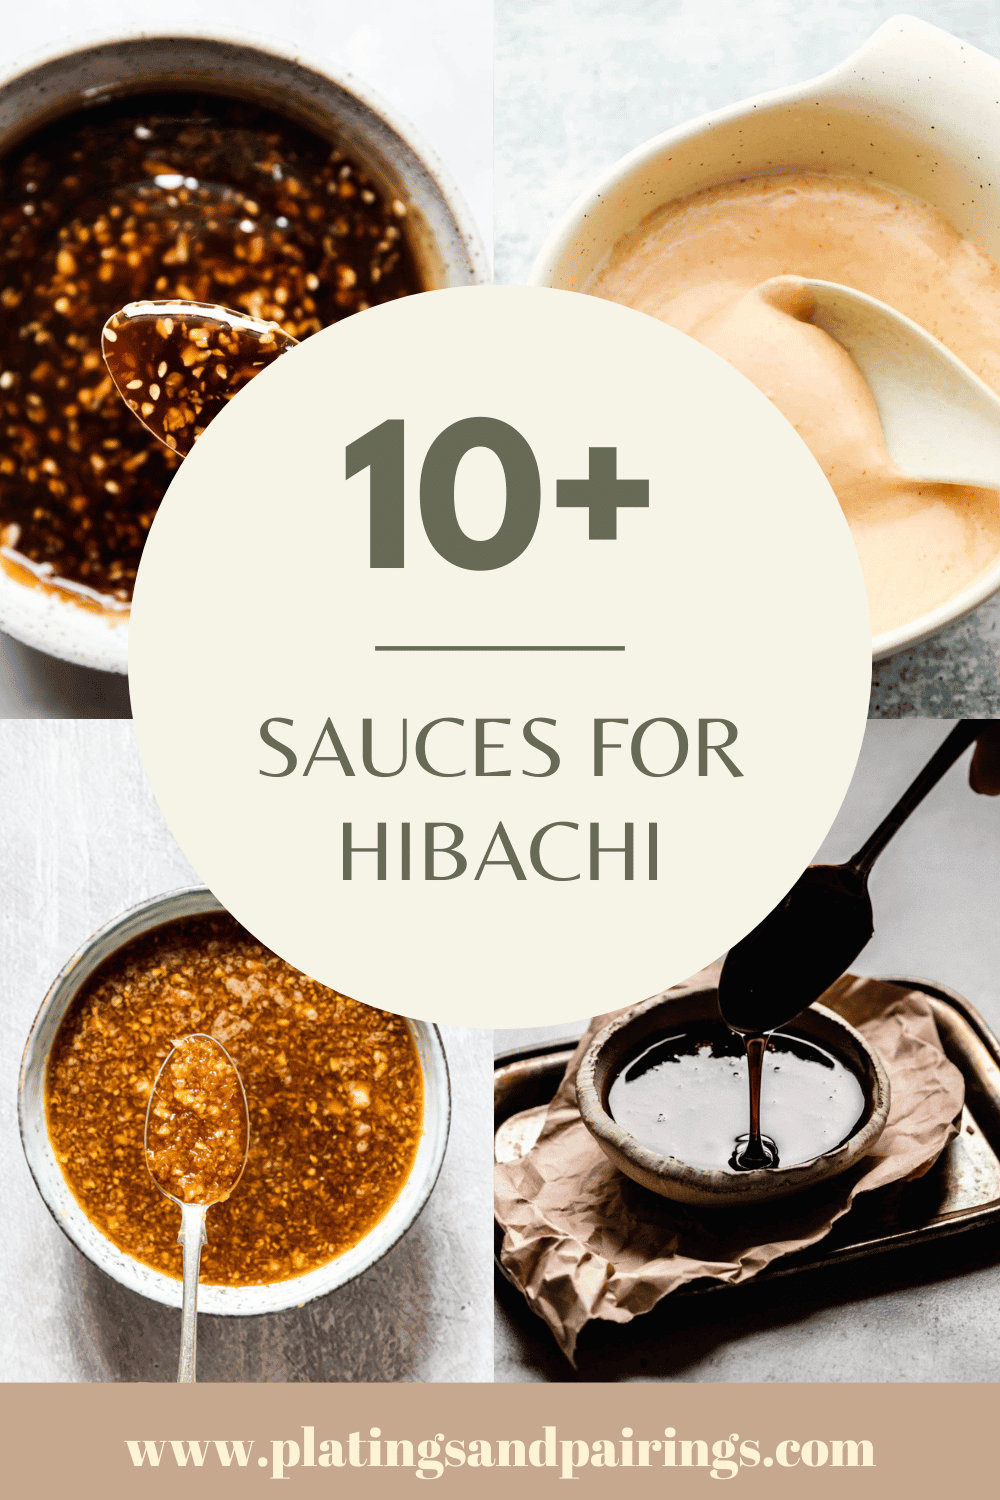 Collage of sauces for hibachi with text overlay.